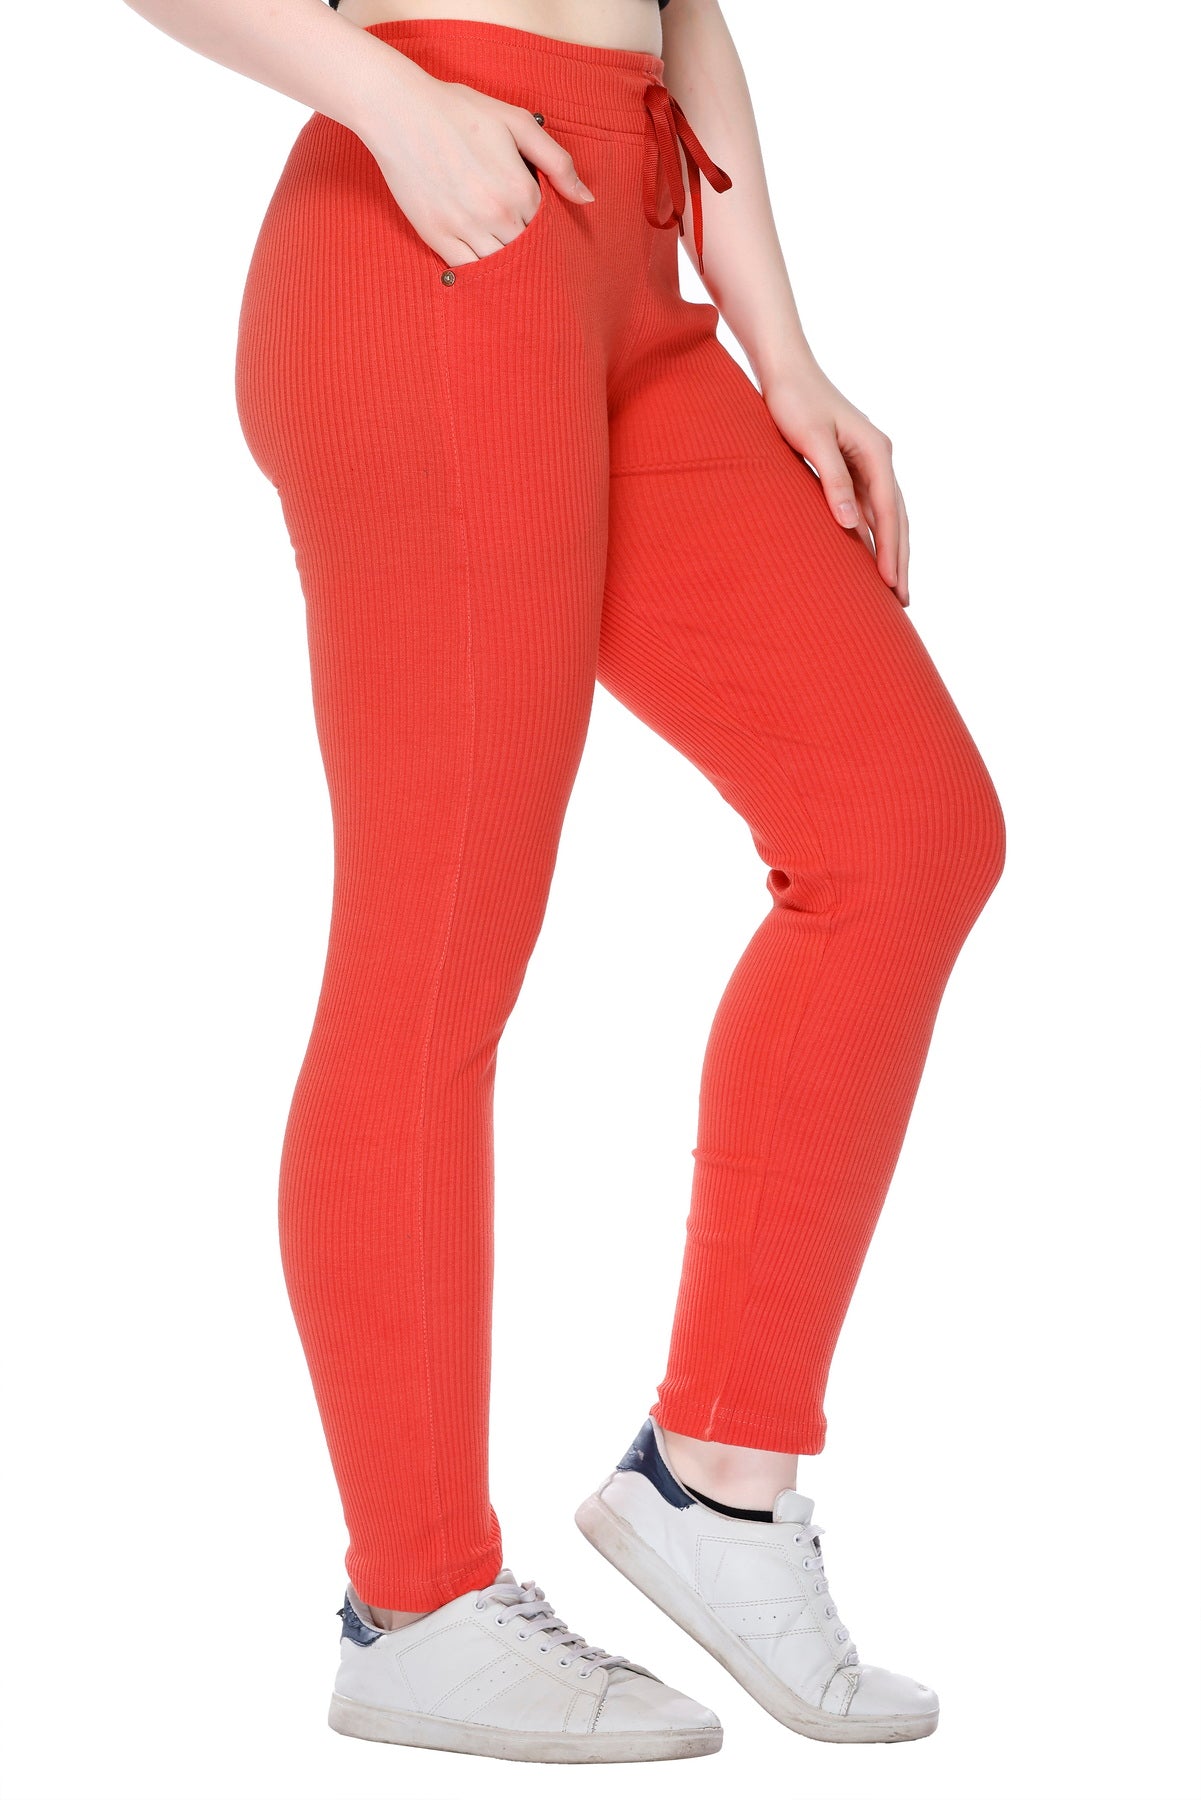 Wholesale Ritzzy Women's Cotton Lycra Leggings Combo Offer for Women (Multi  Color) with best liquidation deal | Excess2sell